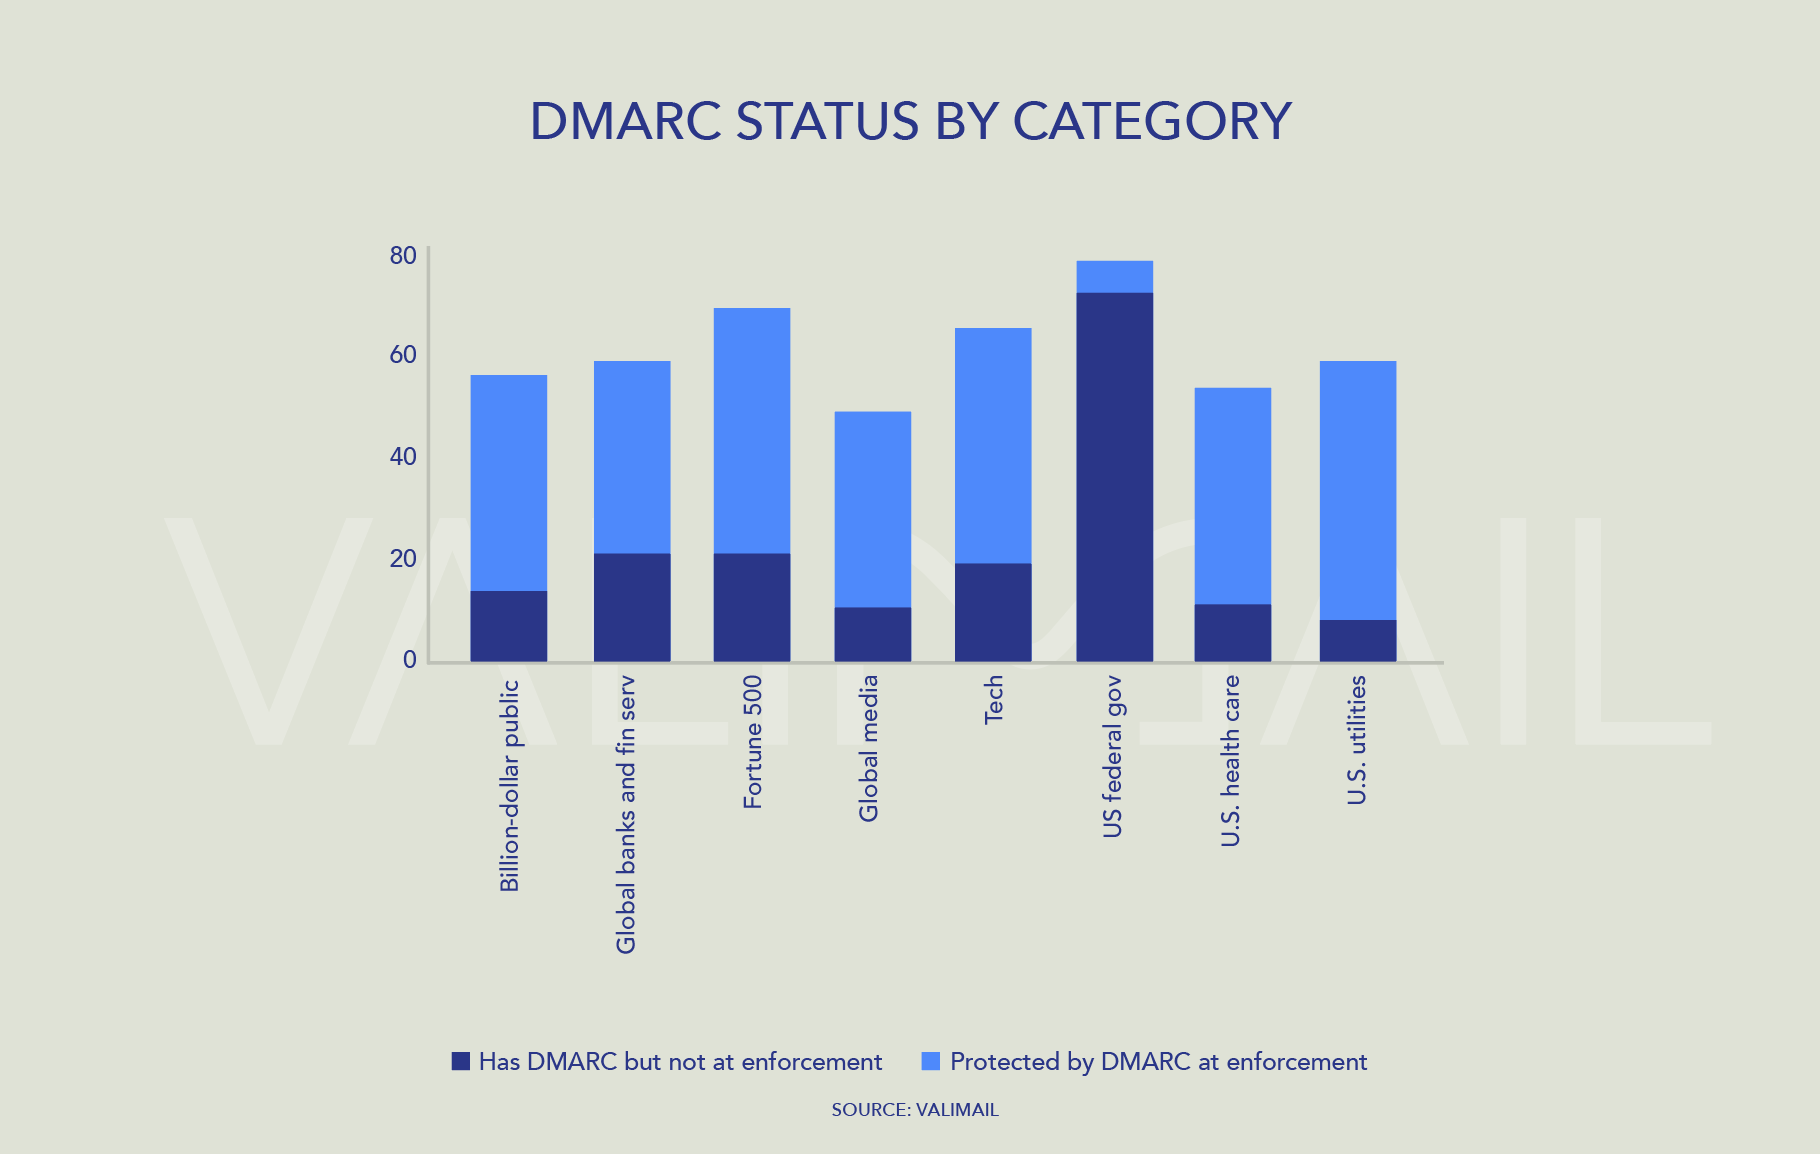 Column chart showing relative levels of DMARC implementation among various industries